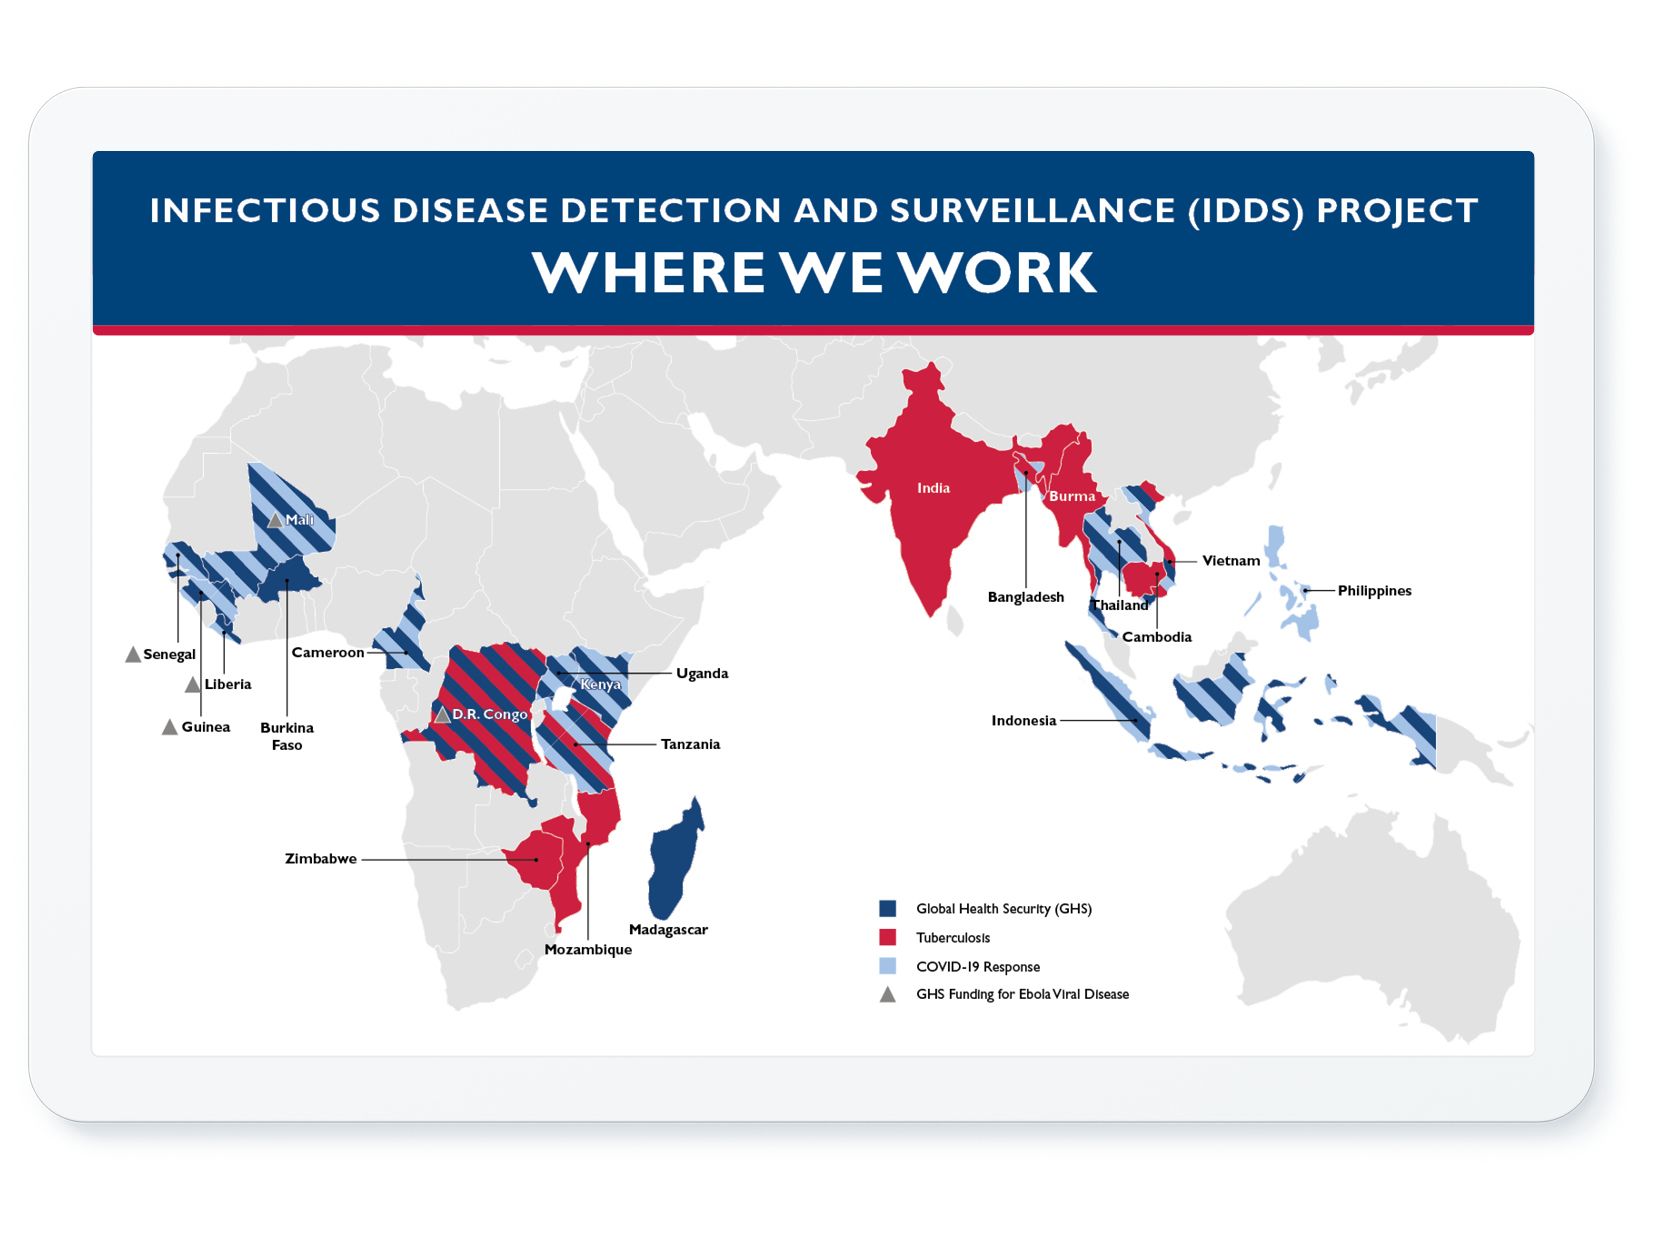 IDDS project map